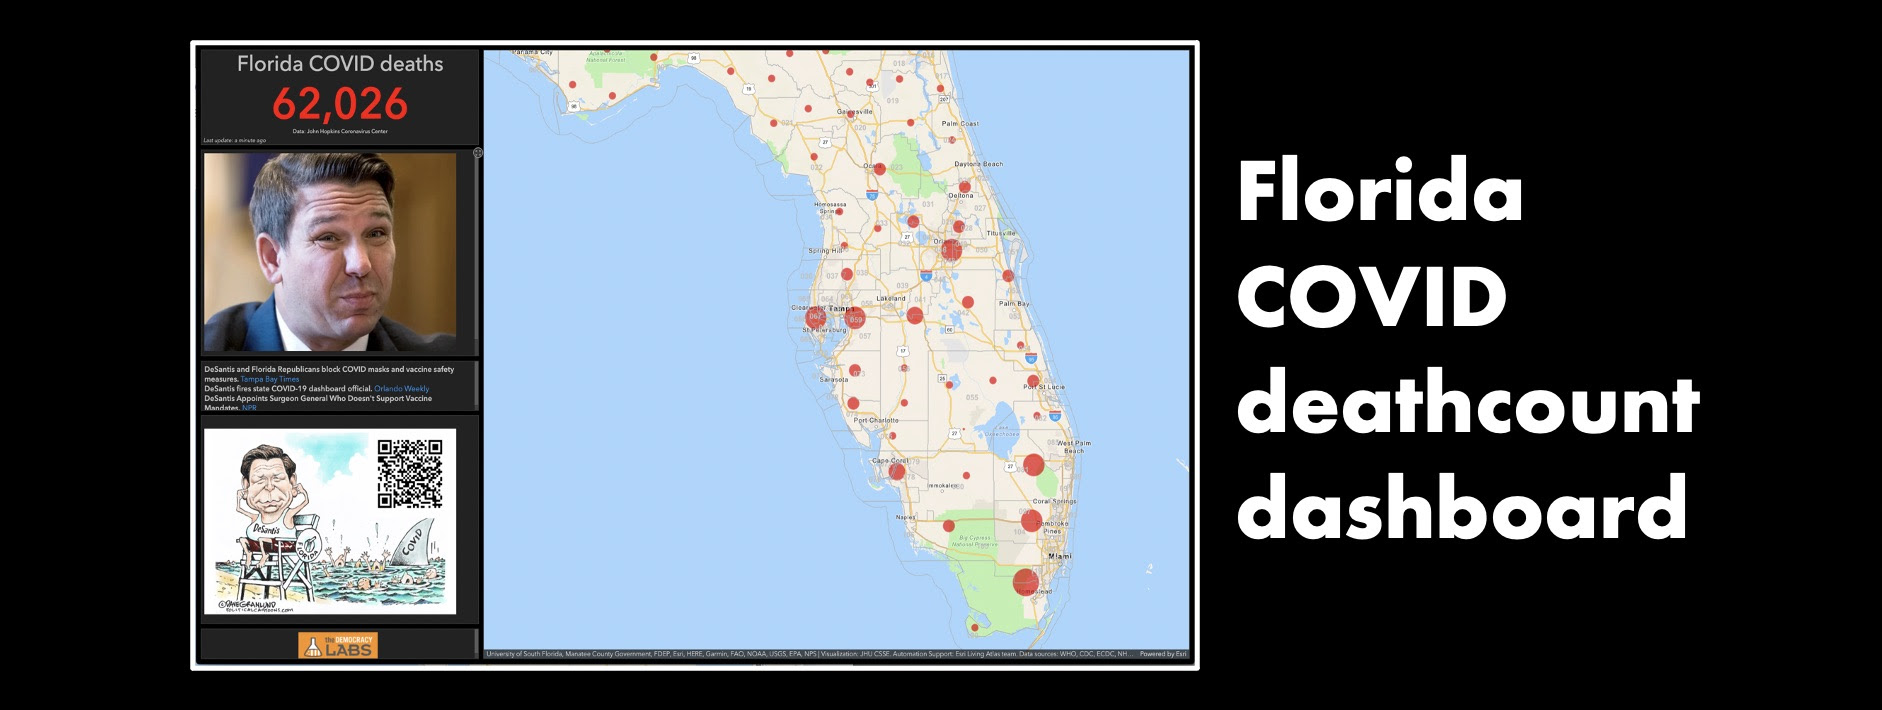 Florida COVID death count dashboard: Politicians playing doctor is deadly.